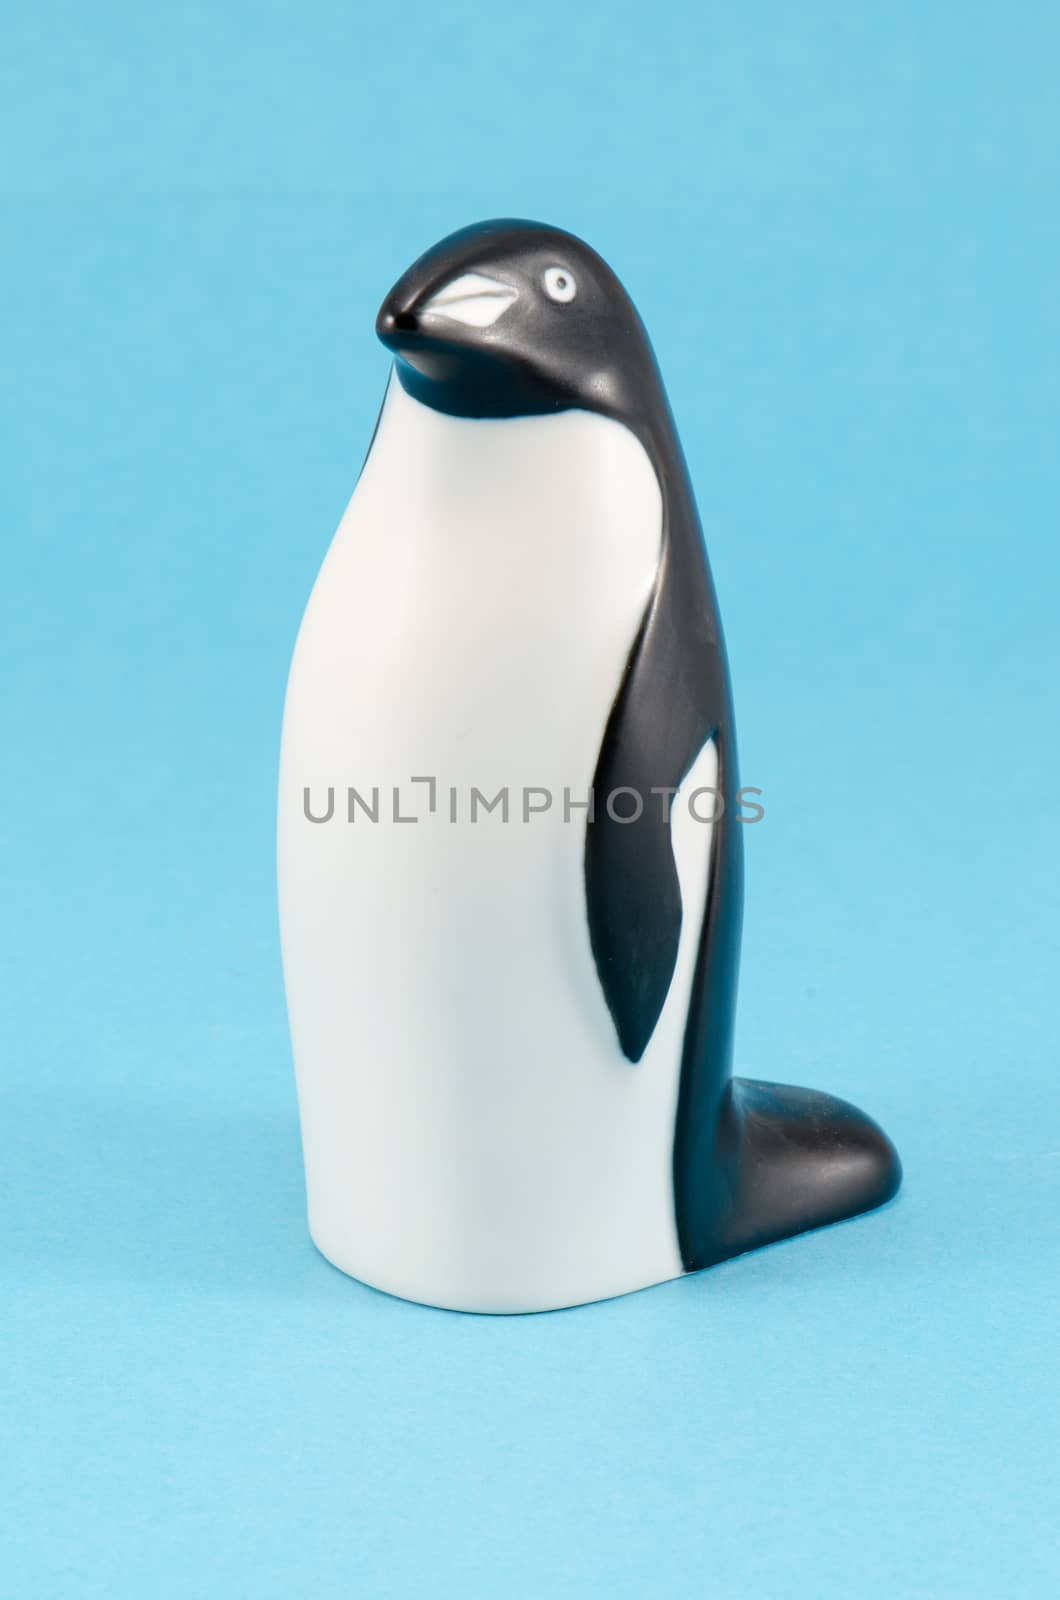 toy penguin figurine home decor on blue background by sauletas